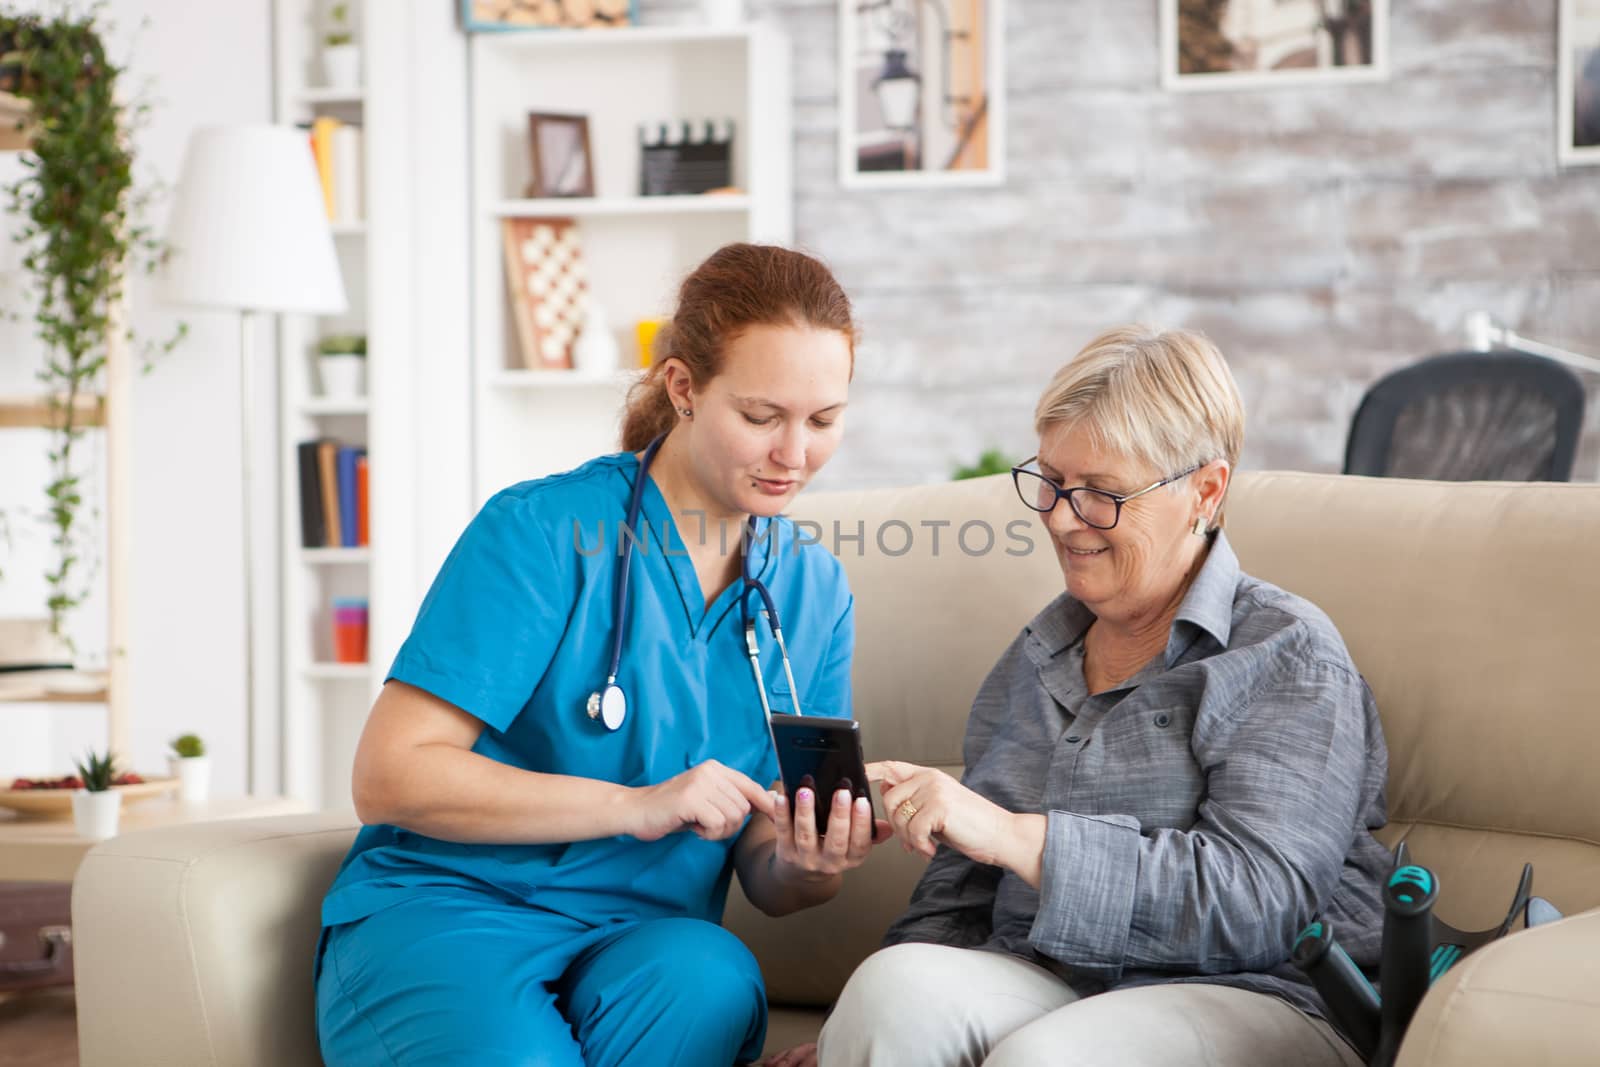 Pretty nurse helping senior woman how to use mobile phone in nursing home.